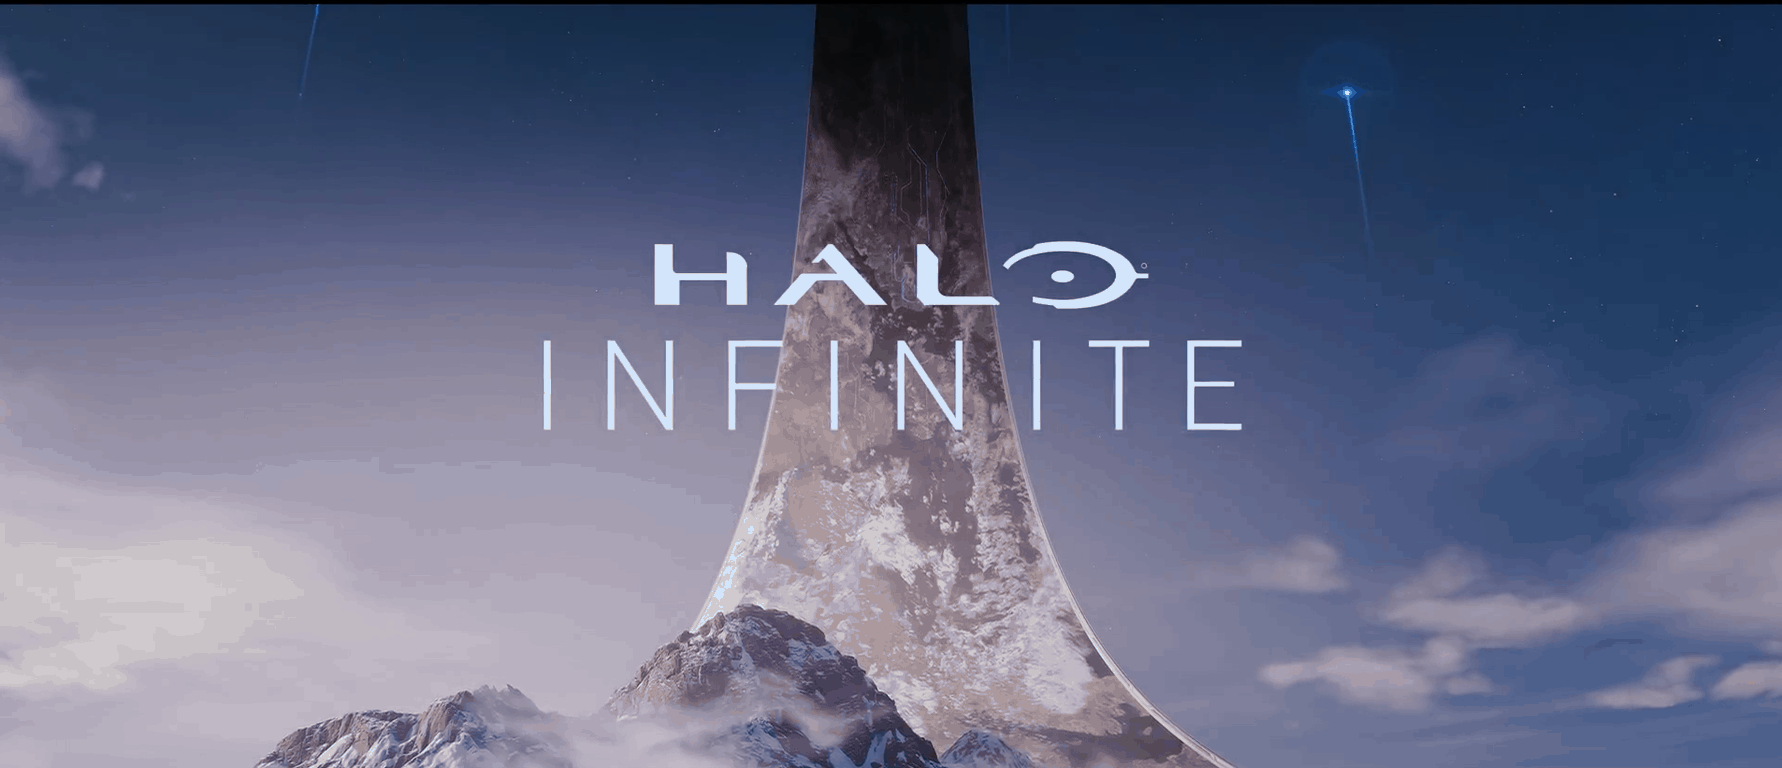 Halo: Infinite to have a strong focus on esports and multiplayer gaming, will have microtransactions - OnMSFT.com - September 18, 2018